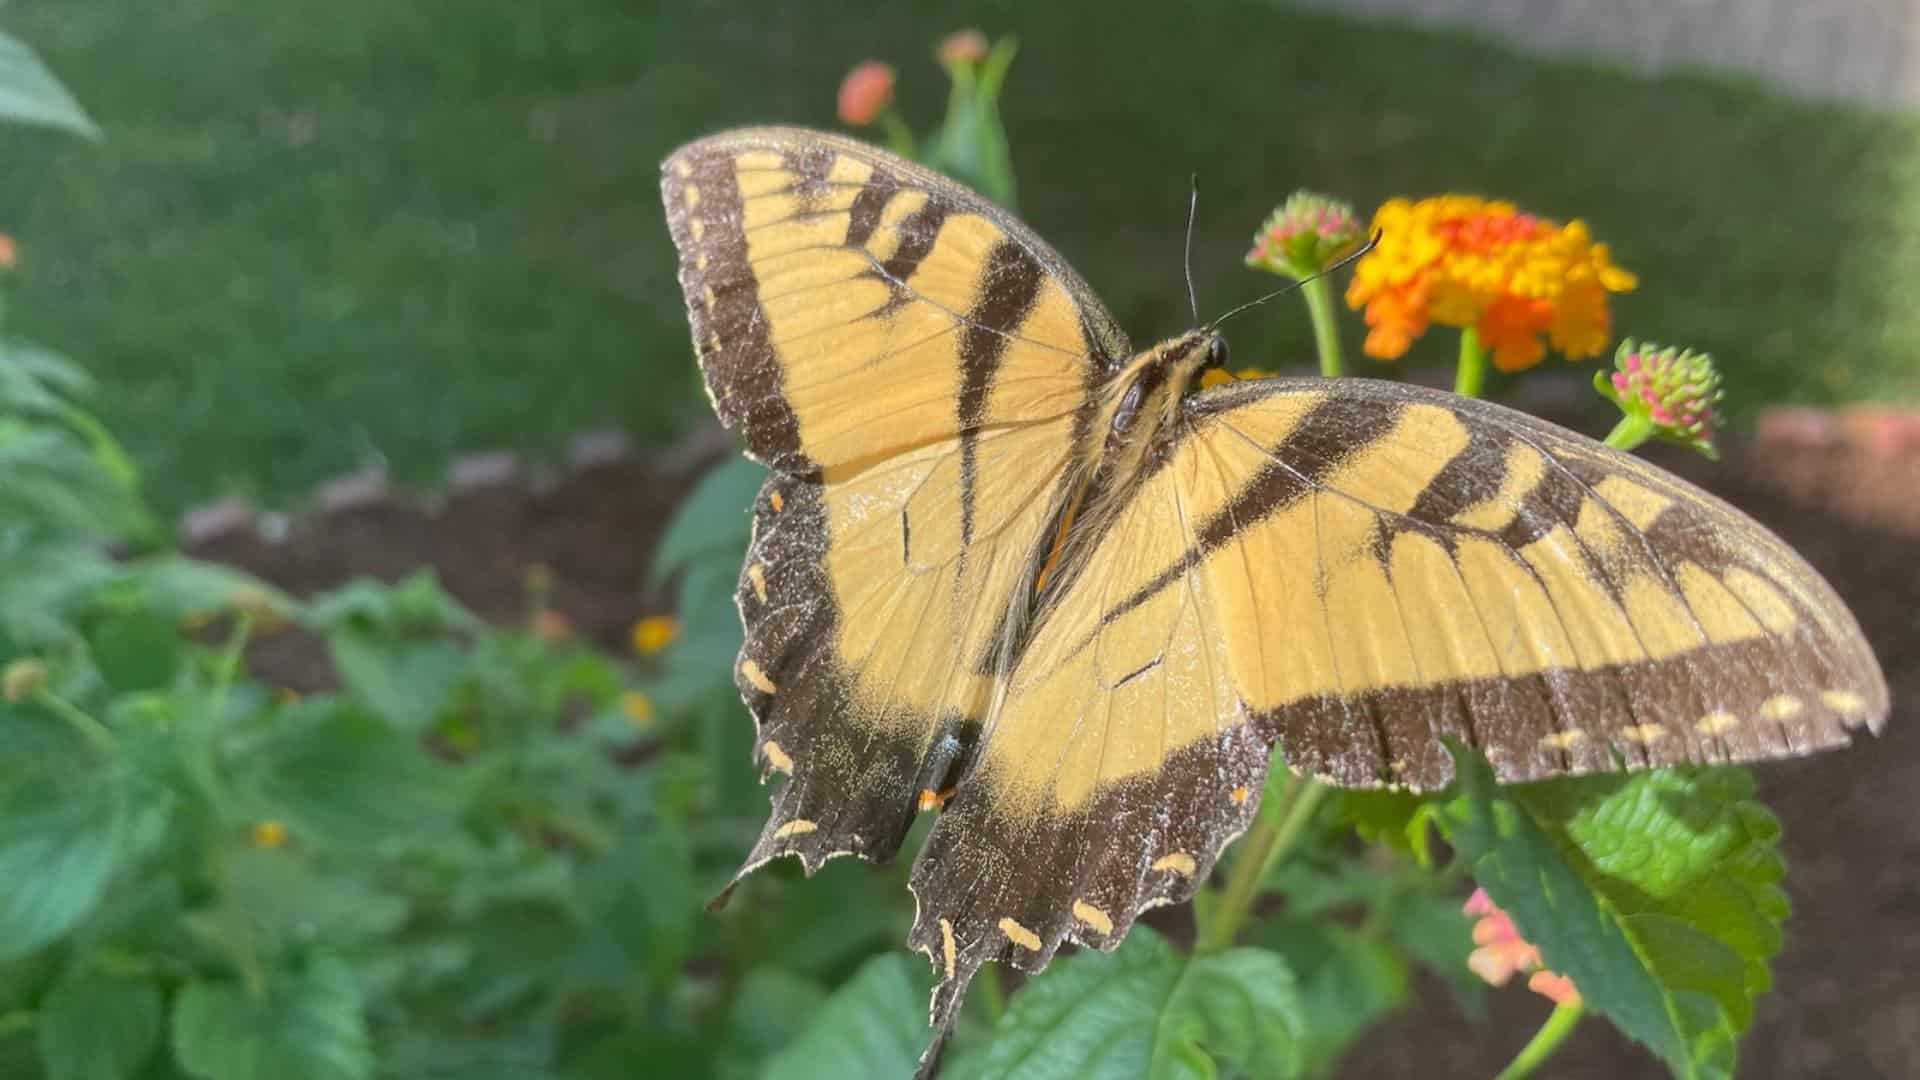 Close up view of yellow and black butterfly sitting on a green plant